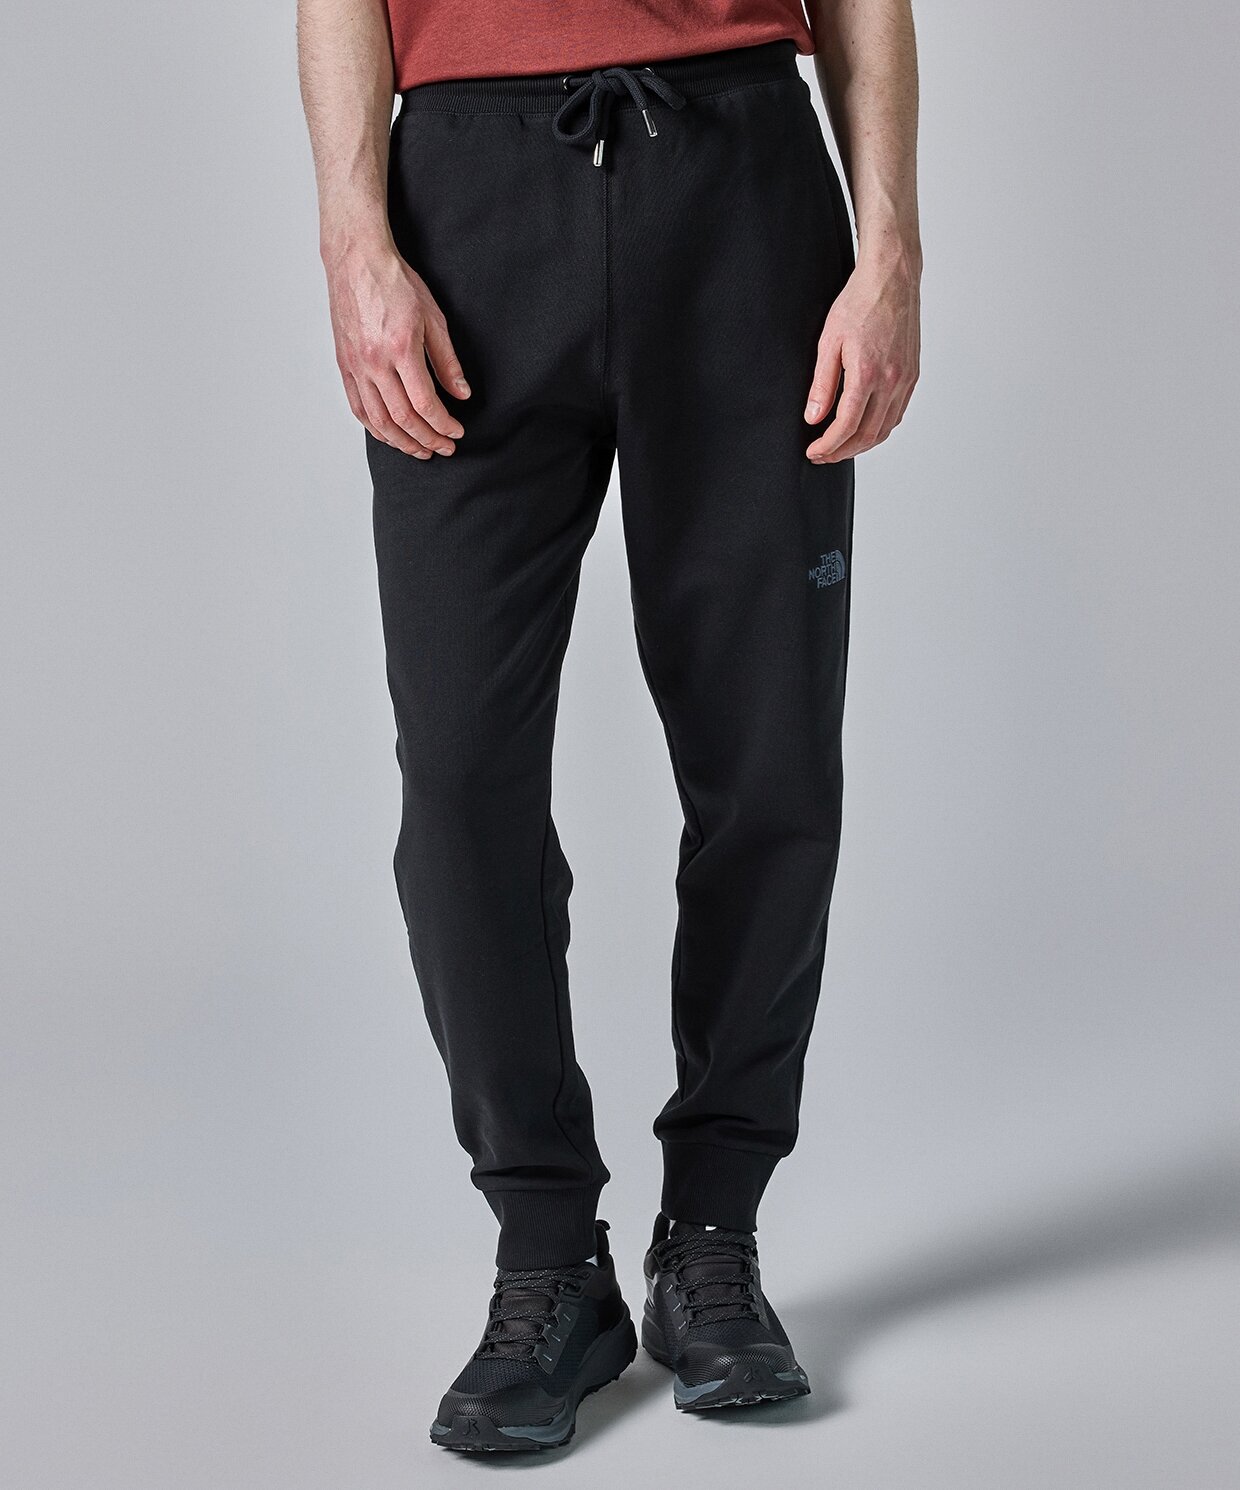 resm The North Face M Nse Light Pant